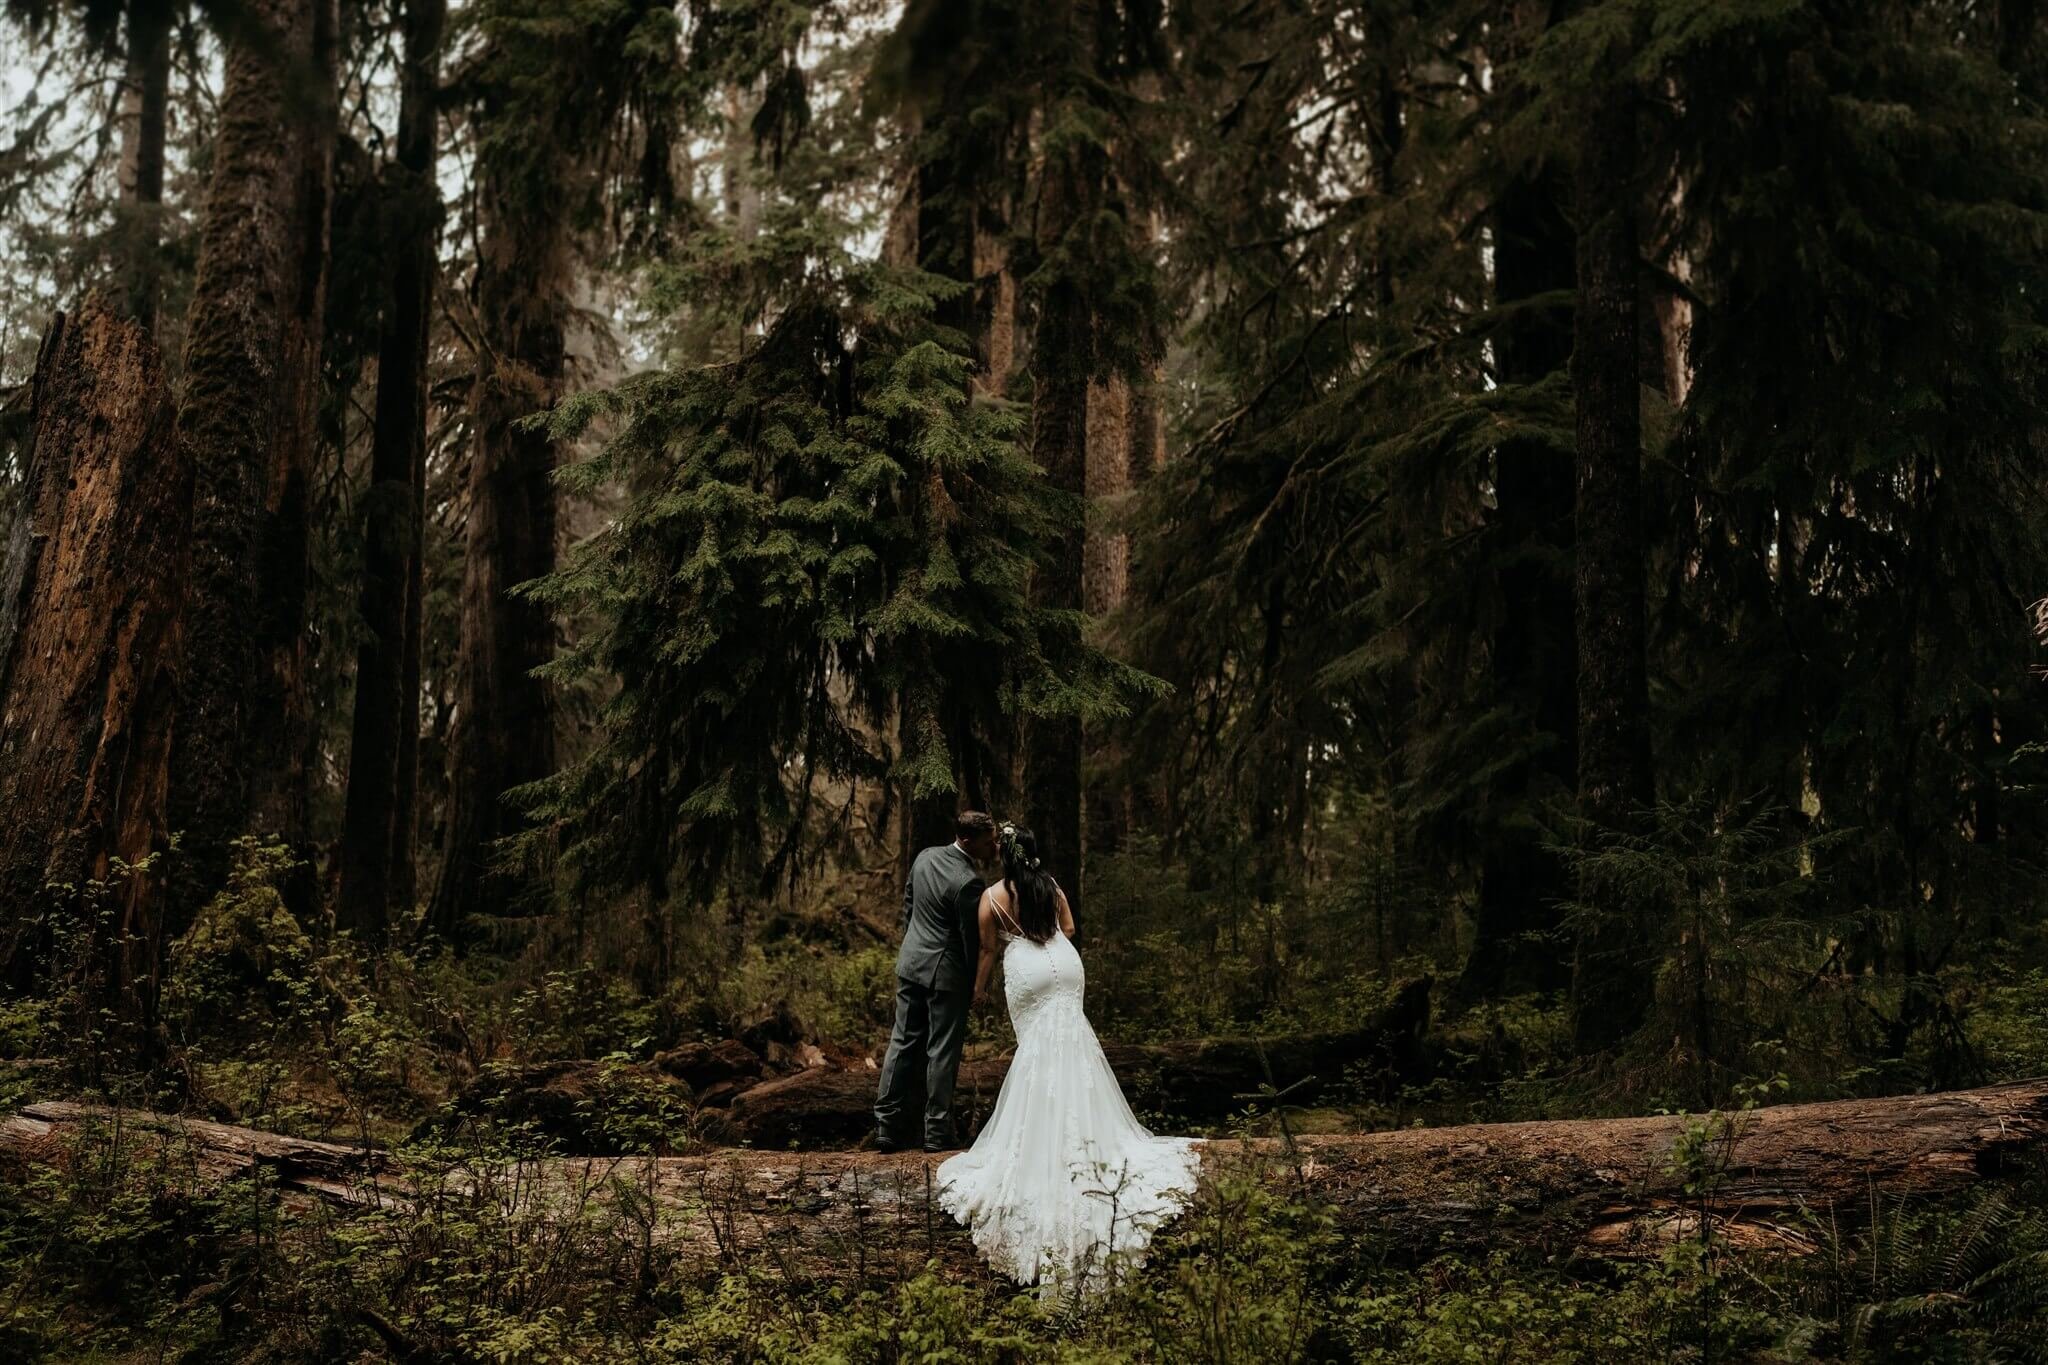 Wedding portraits in the Hoh Rainforest